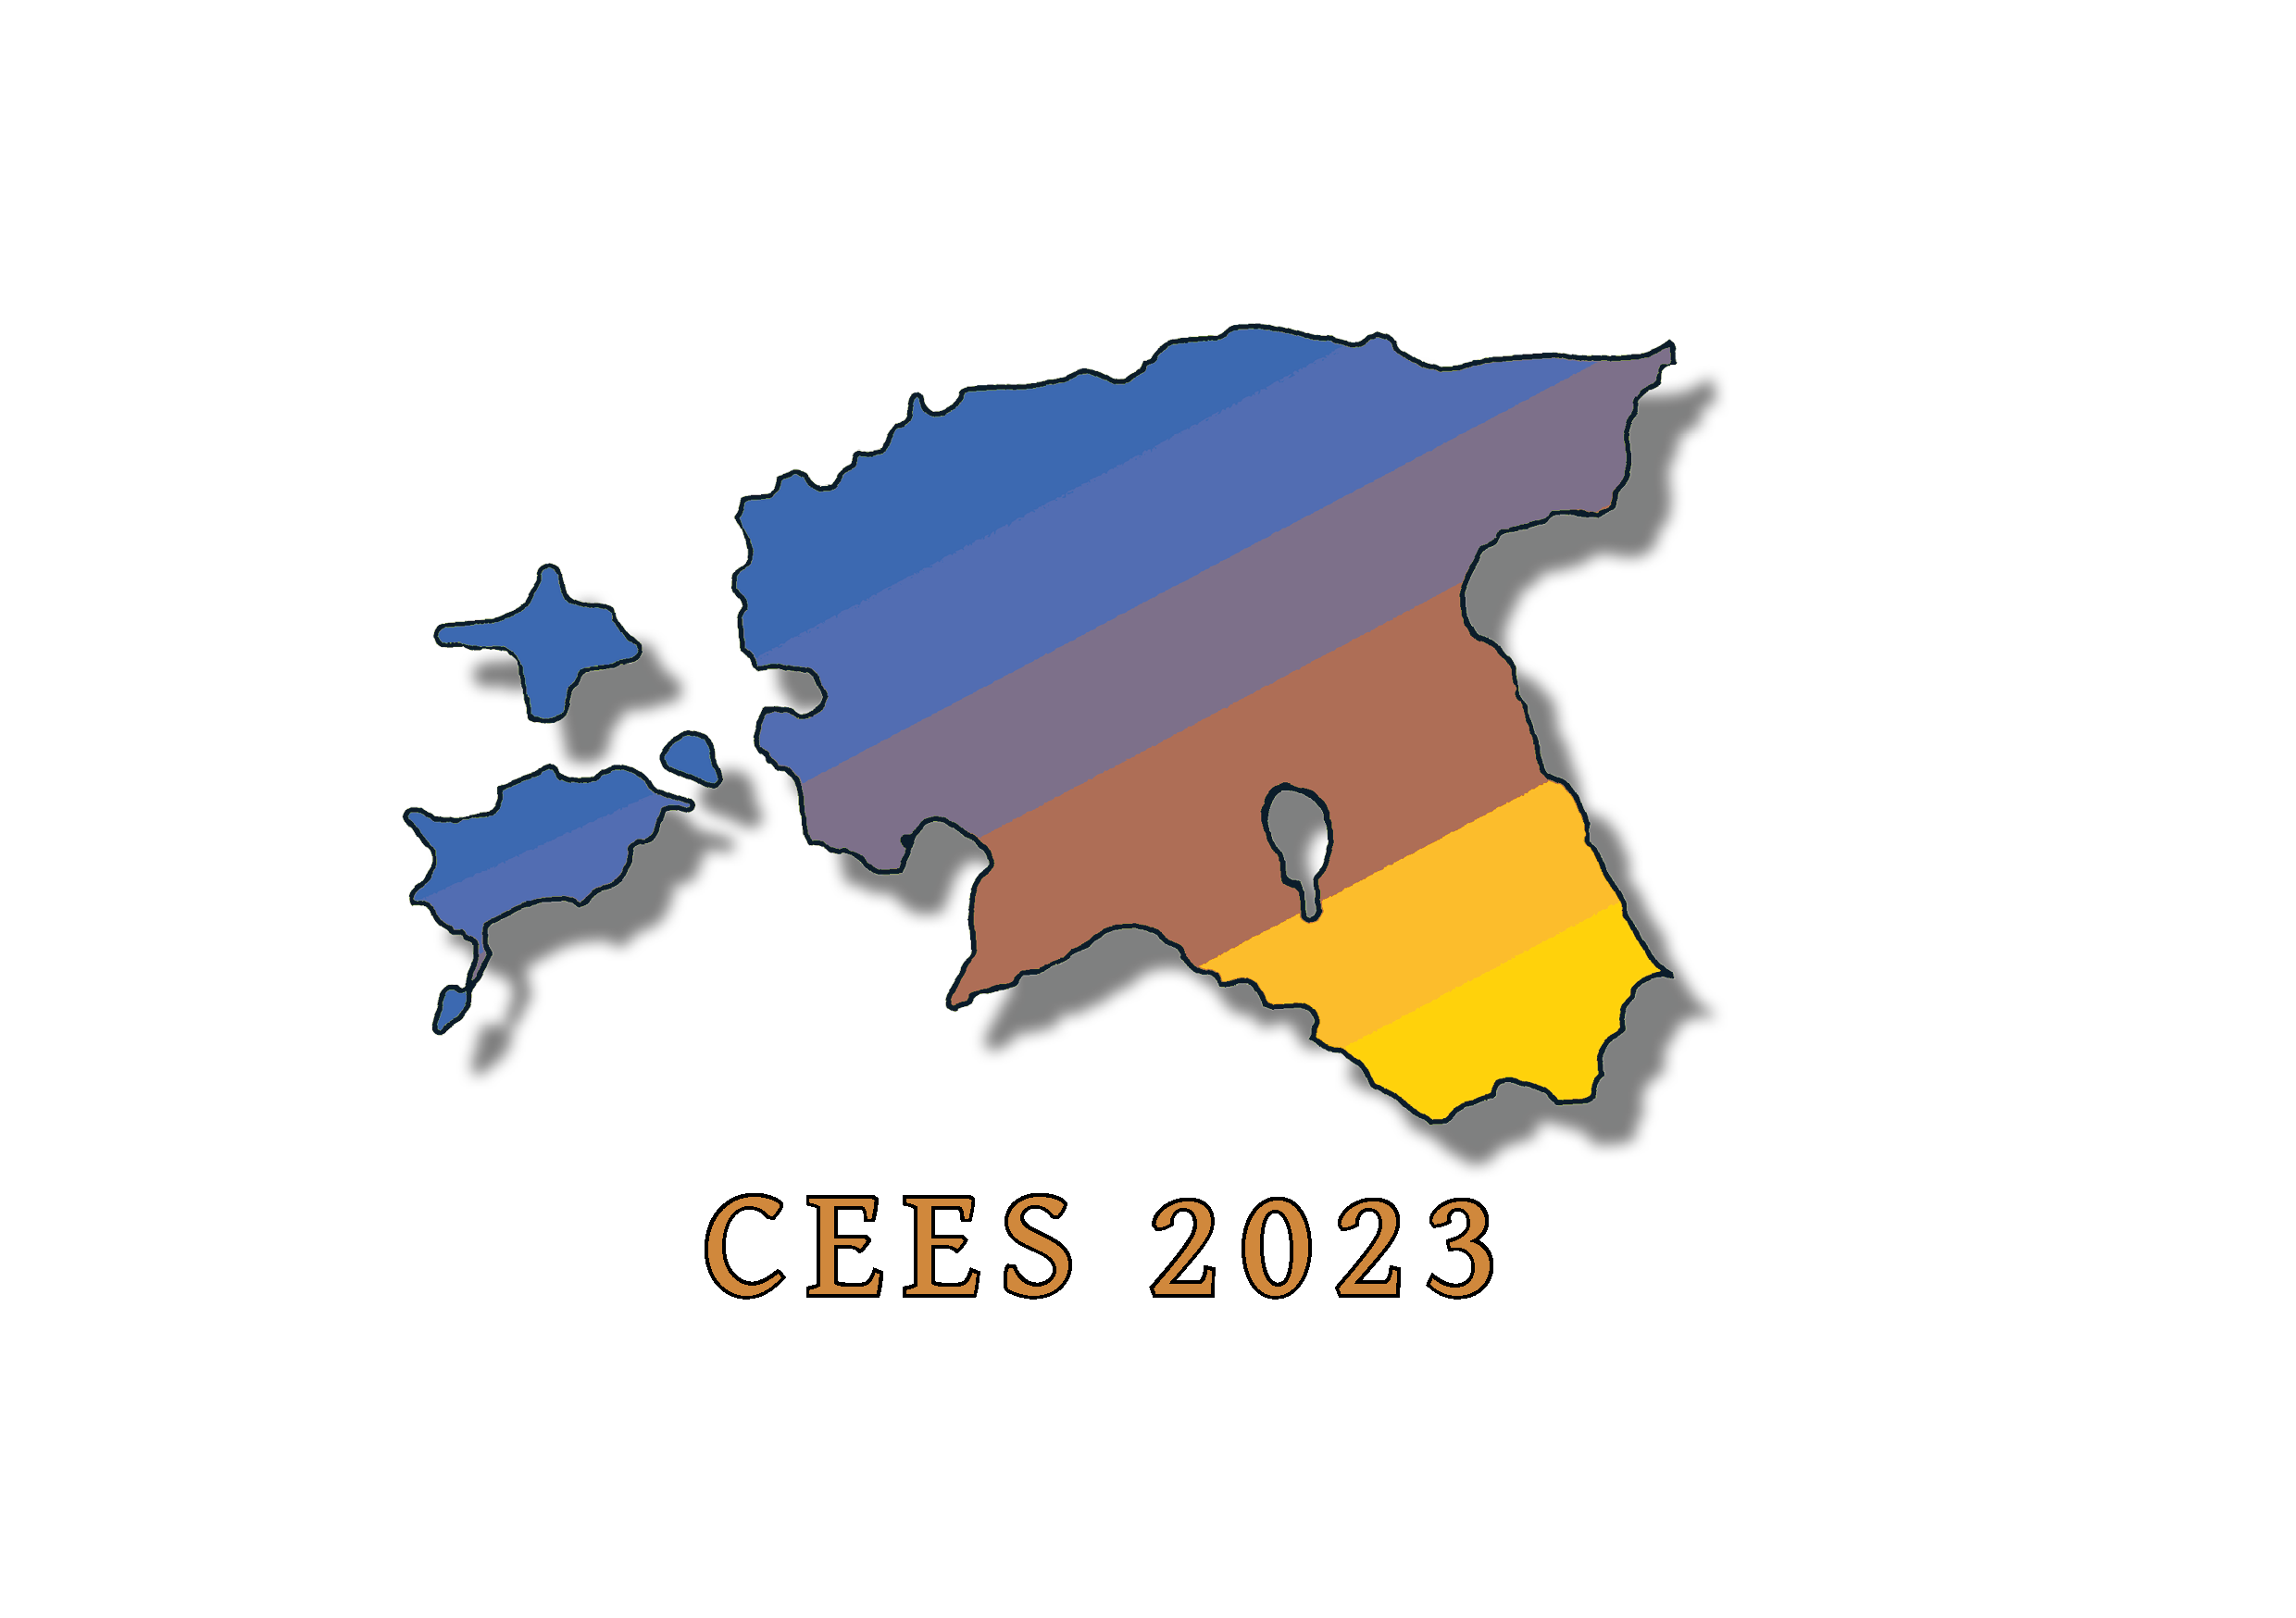 CEES 2023